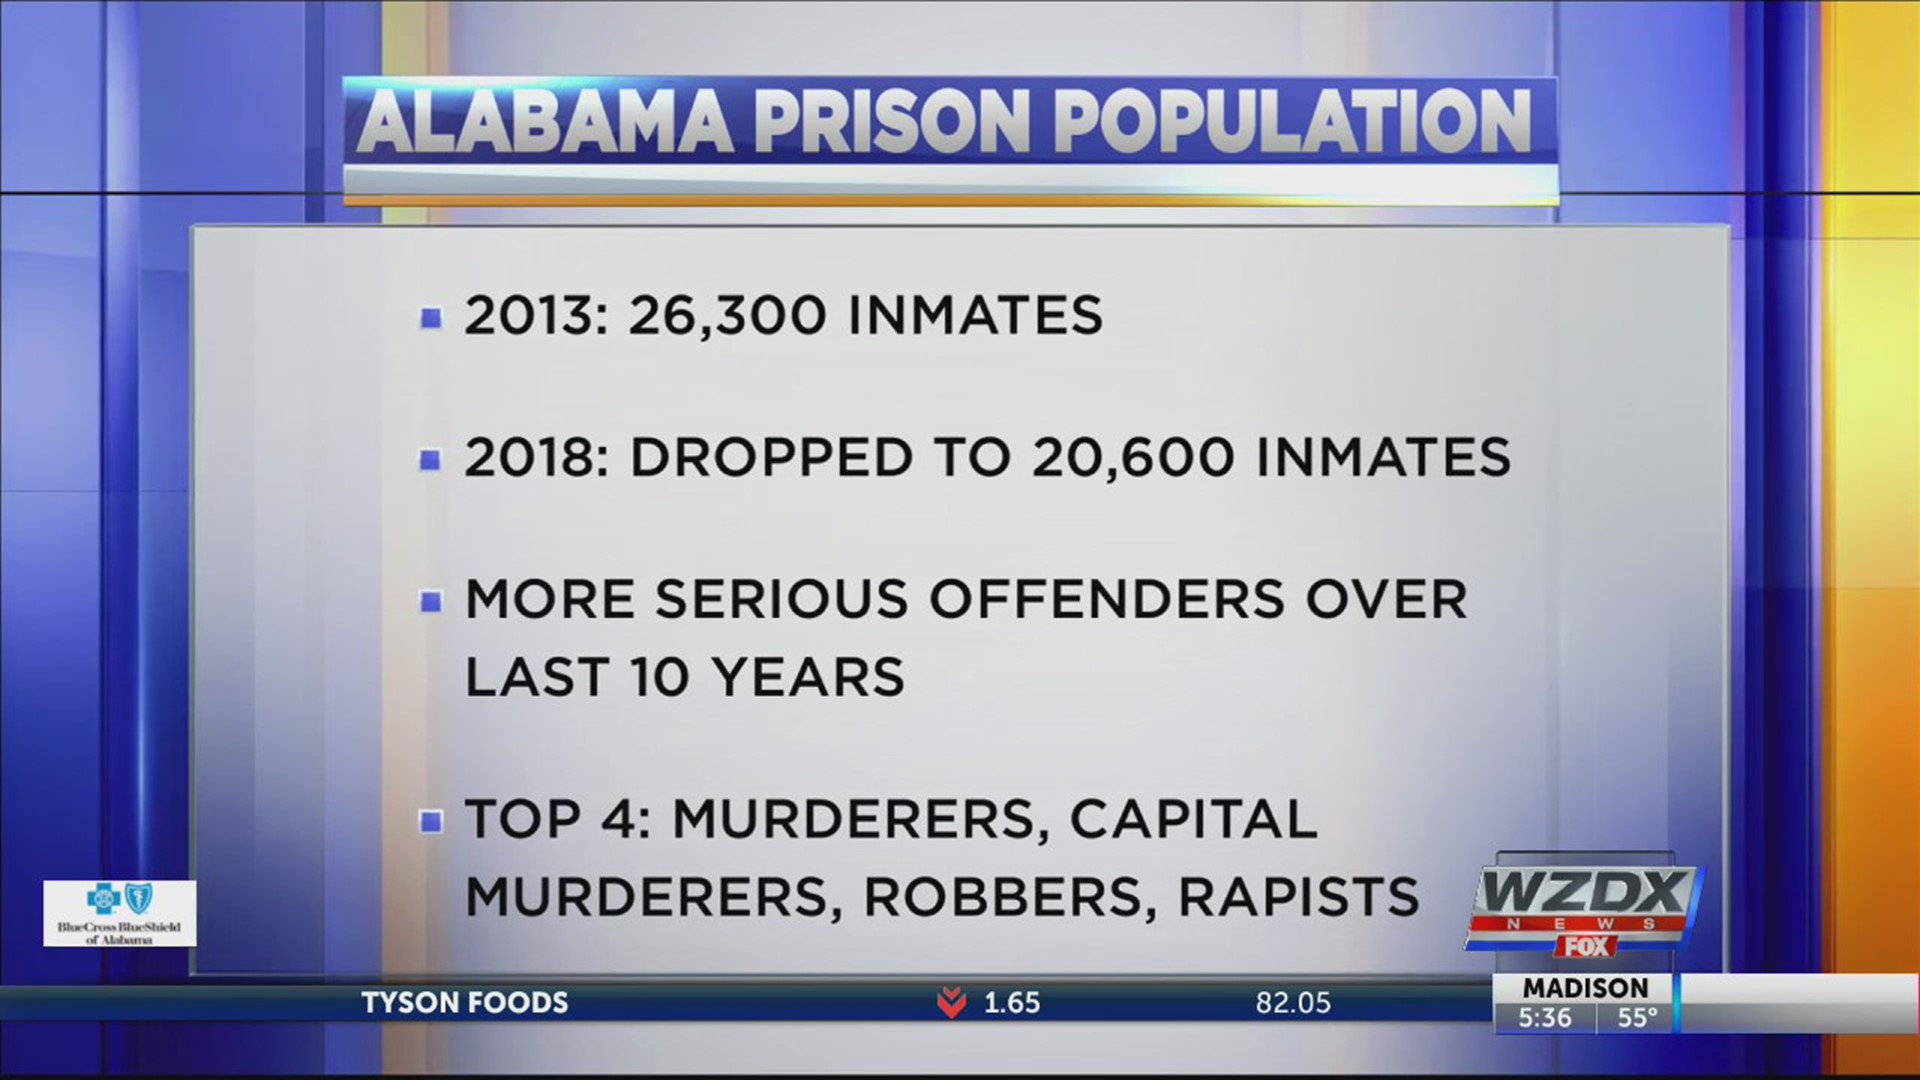 Over the last several years, Alabama prisons have actually seen a drop in their number of inmates.